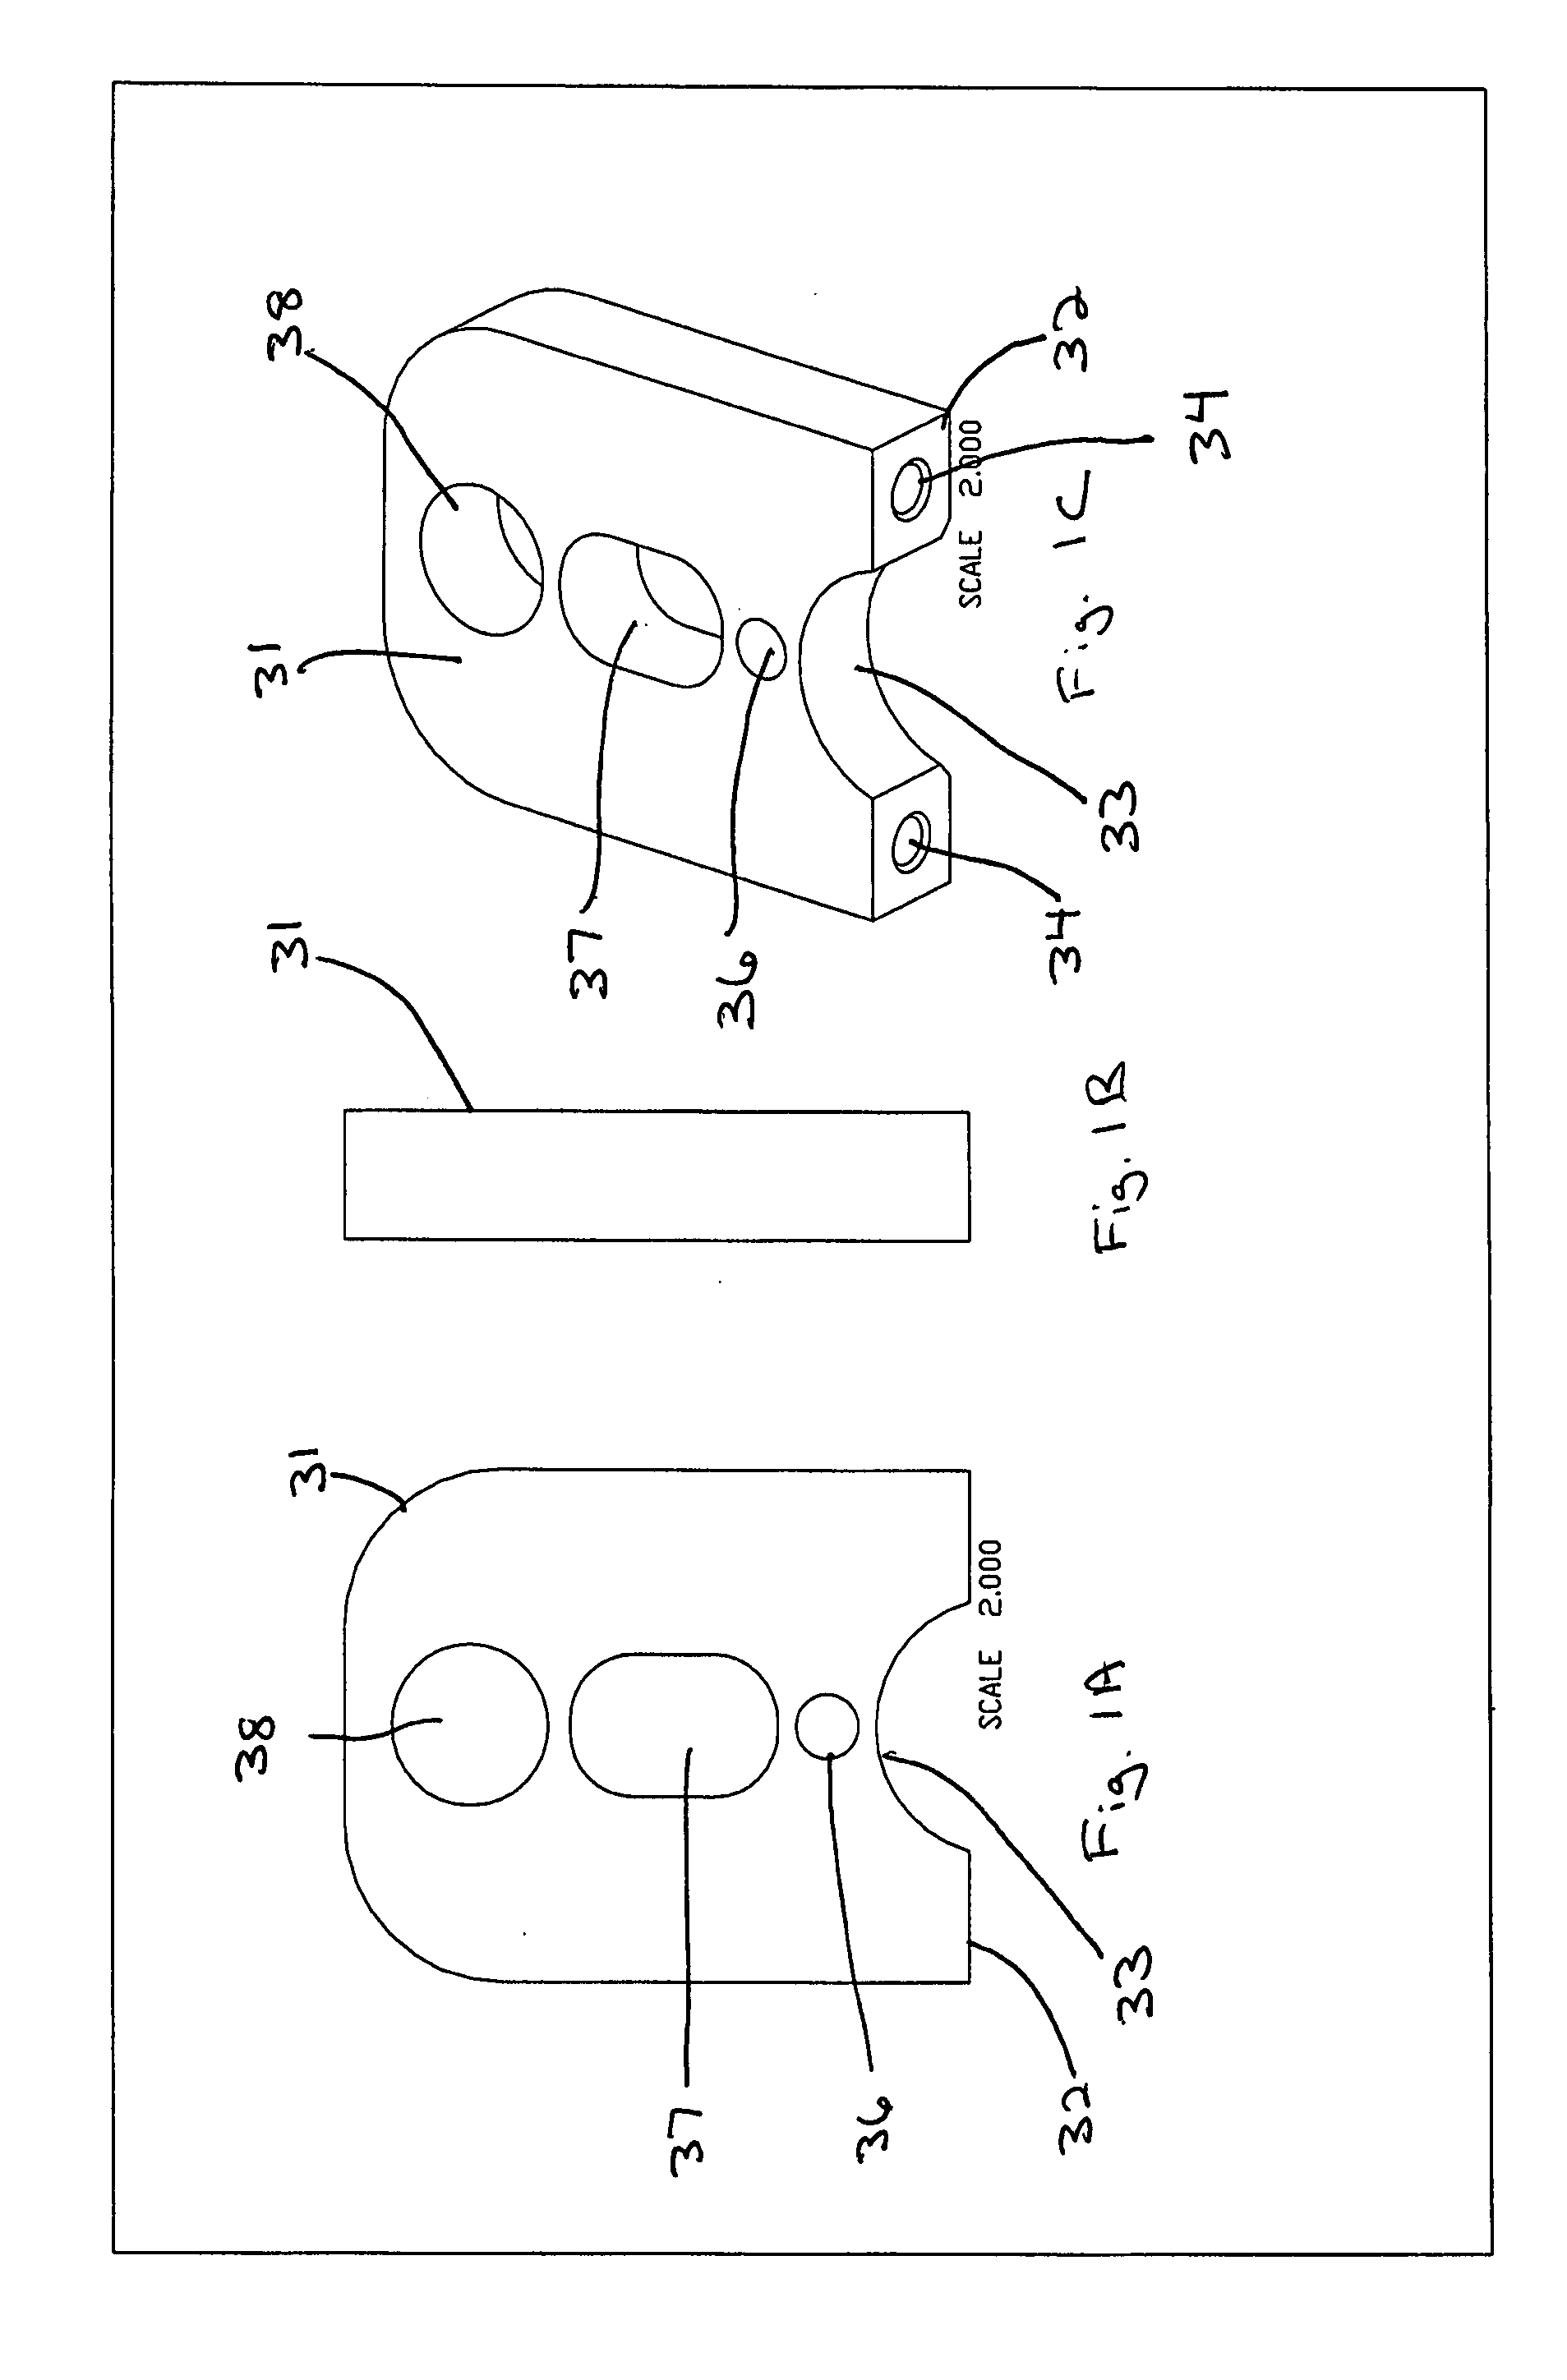 Apparatus for mounting a wheelchair amputee pad